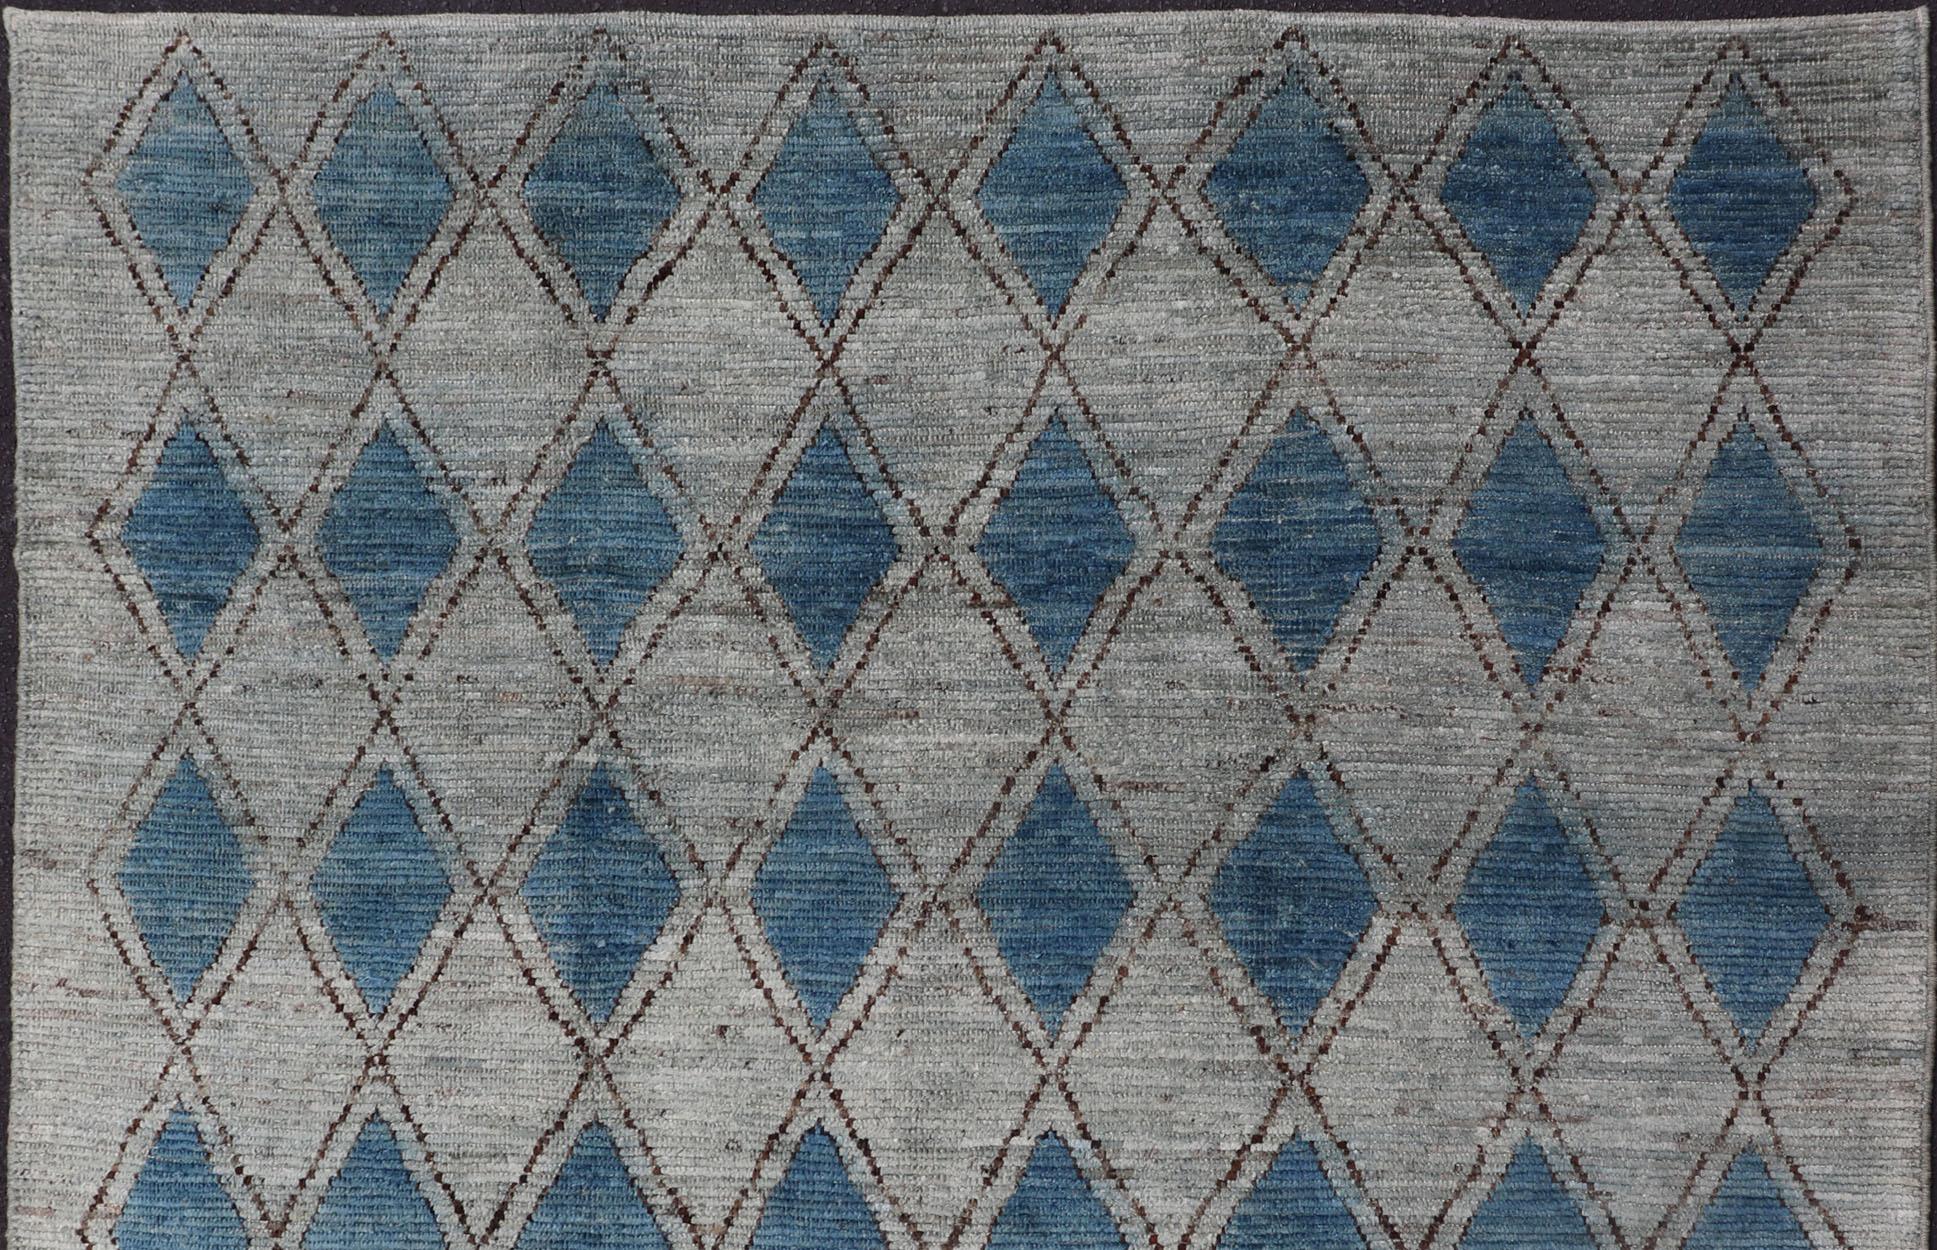 Blue, gray, and brown rug with modern casual design and natural wool, rug AFG-31952, country of origin / type: Afghanistan / Modern,

This classic natured Moroccan design rug represents modern casual look and features geometrical tribal motif